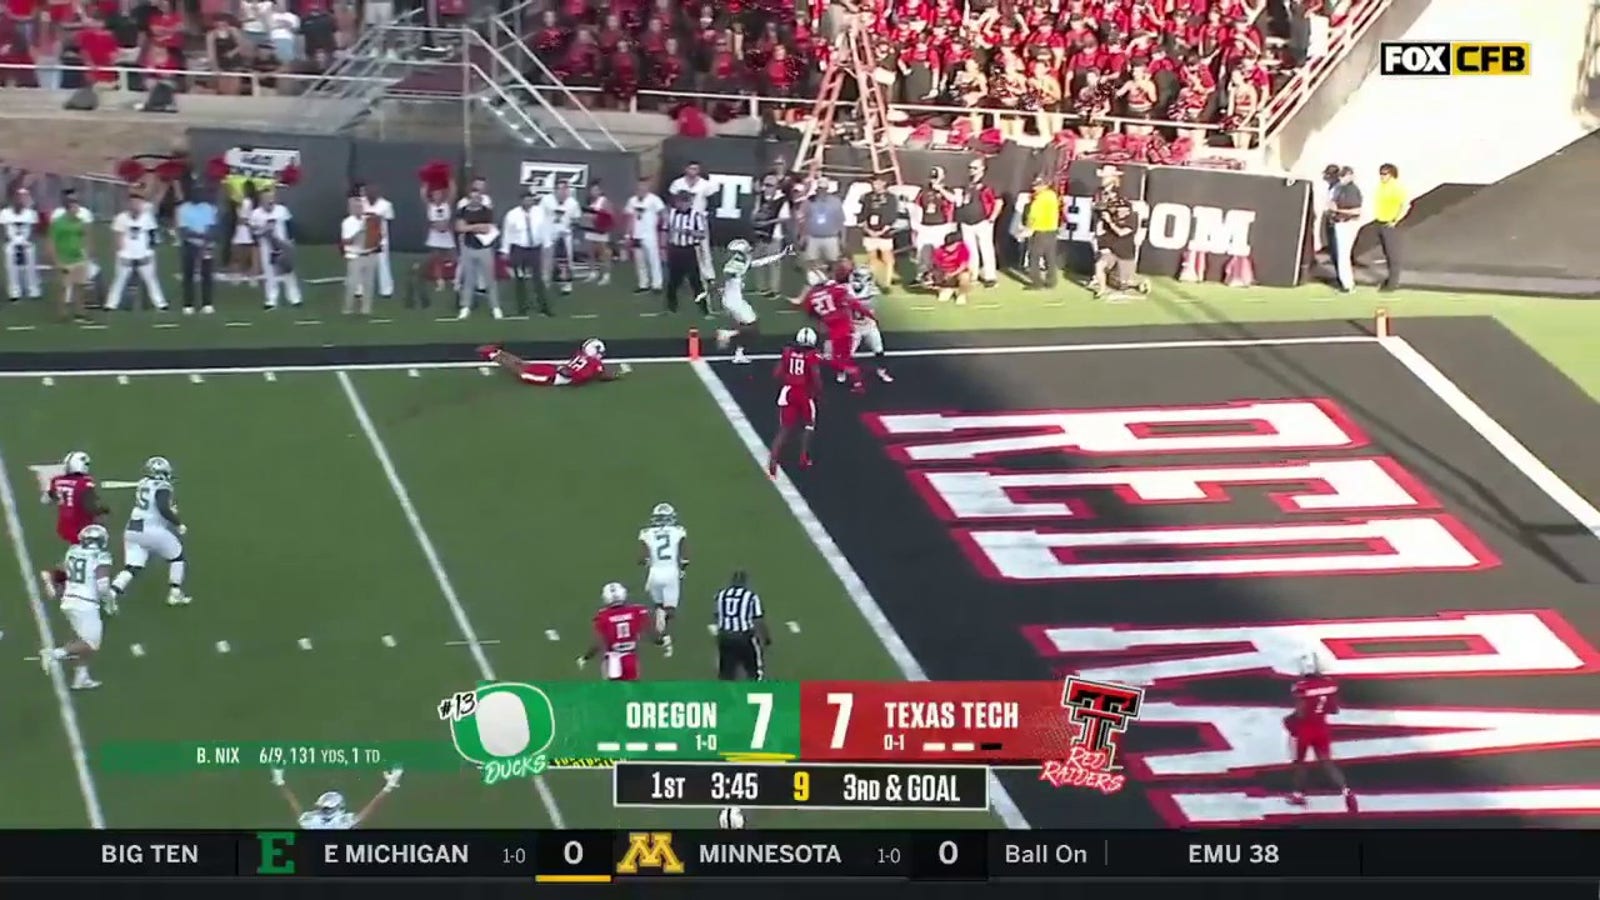 Tez Johnson's 13-yard touchdown and Terrance Ferguson's two-point conversion give Oregon a lead over Texas Tech